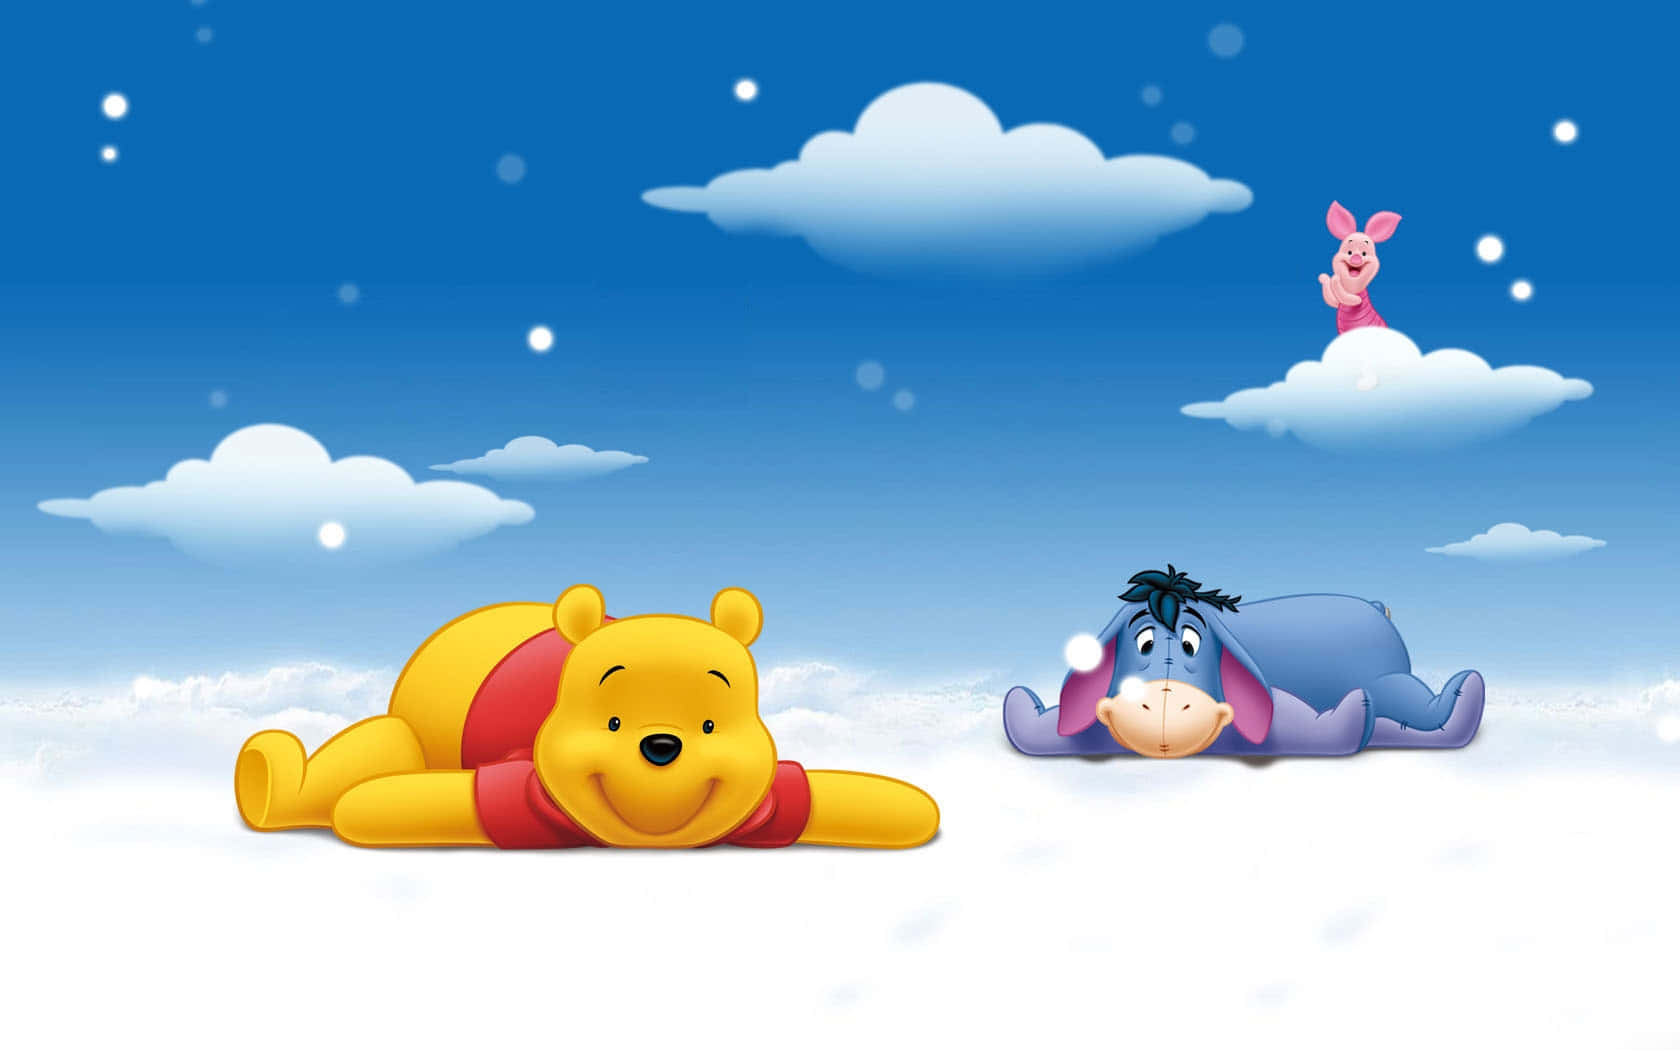 "A Winnie The Pooh Desktop Background to Brighten Up Your Home or Office" Wallpaper